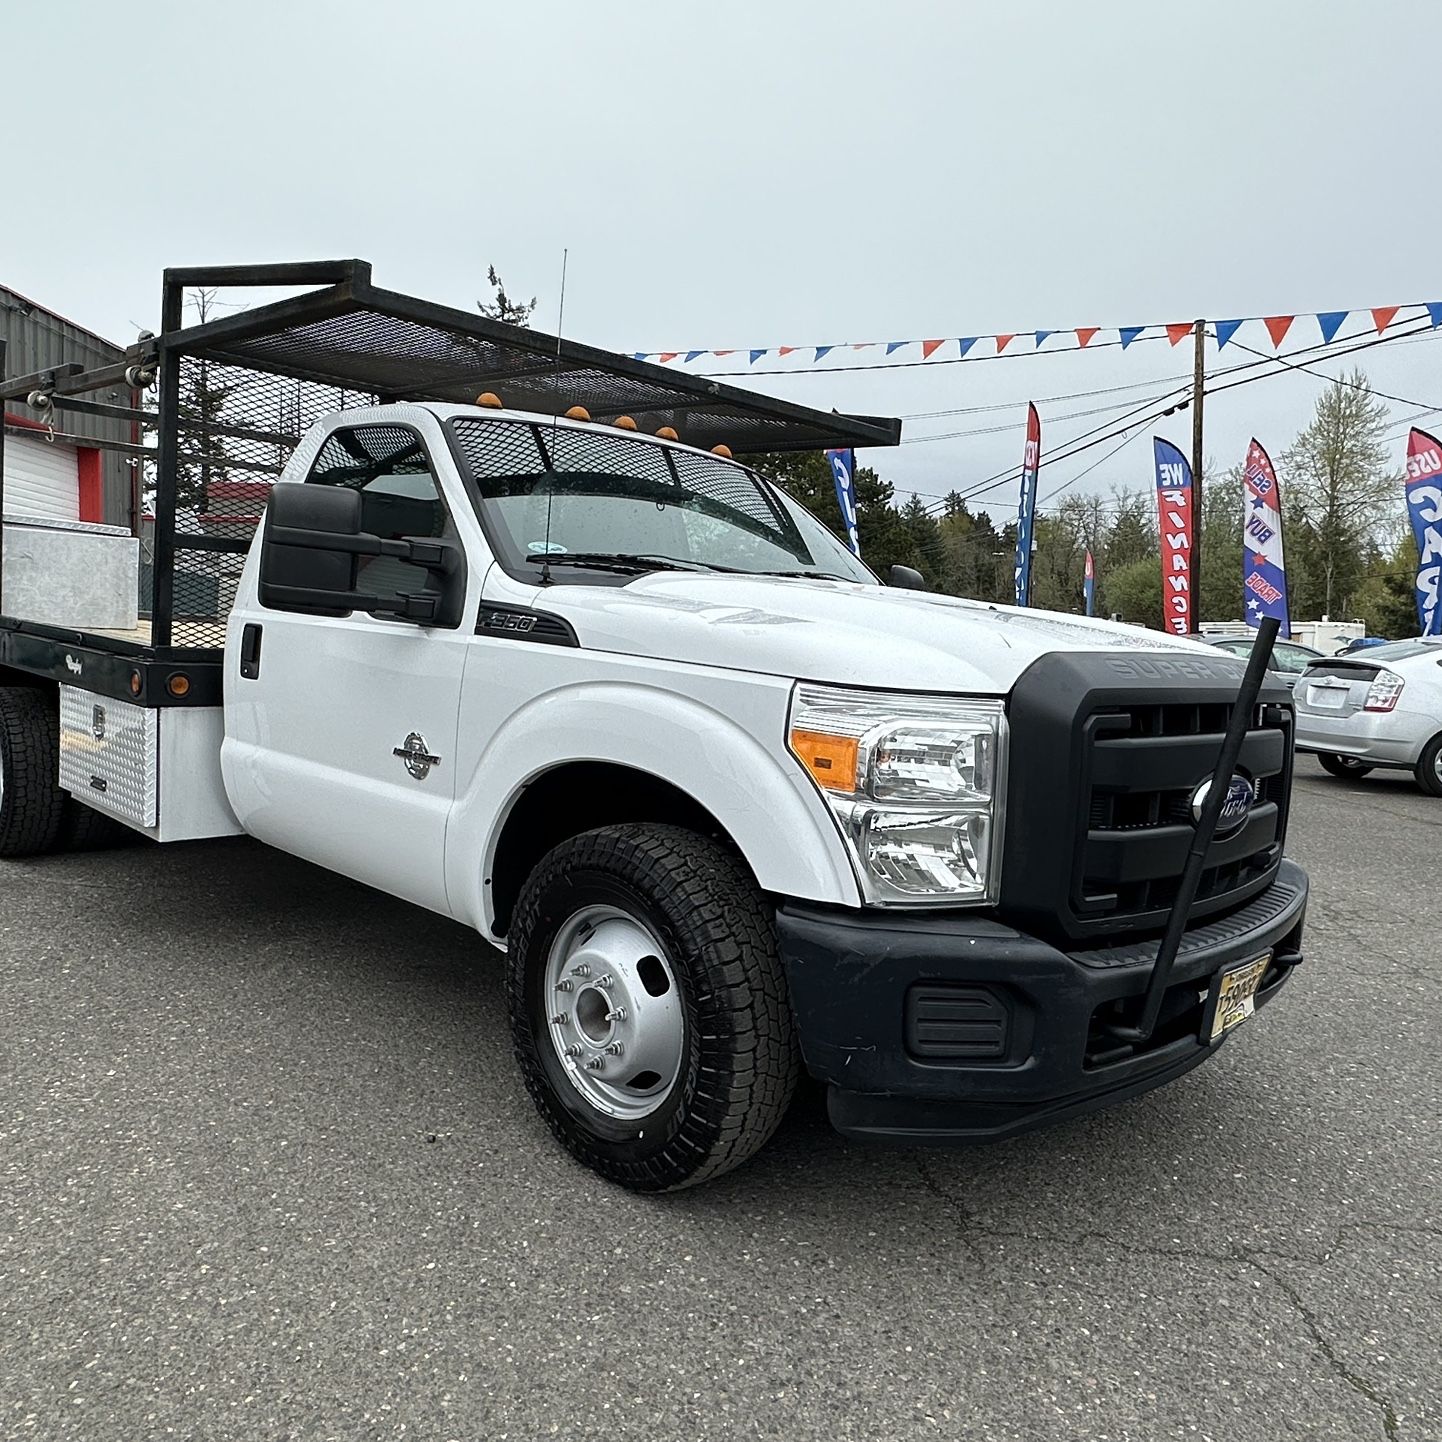 2014 Ford F-350 Super Duty Chassis